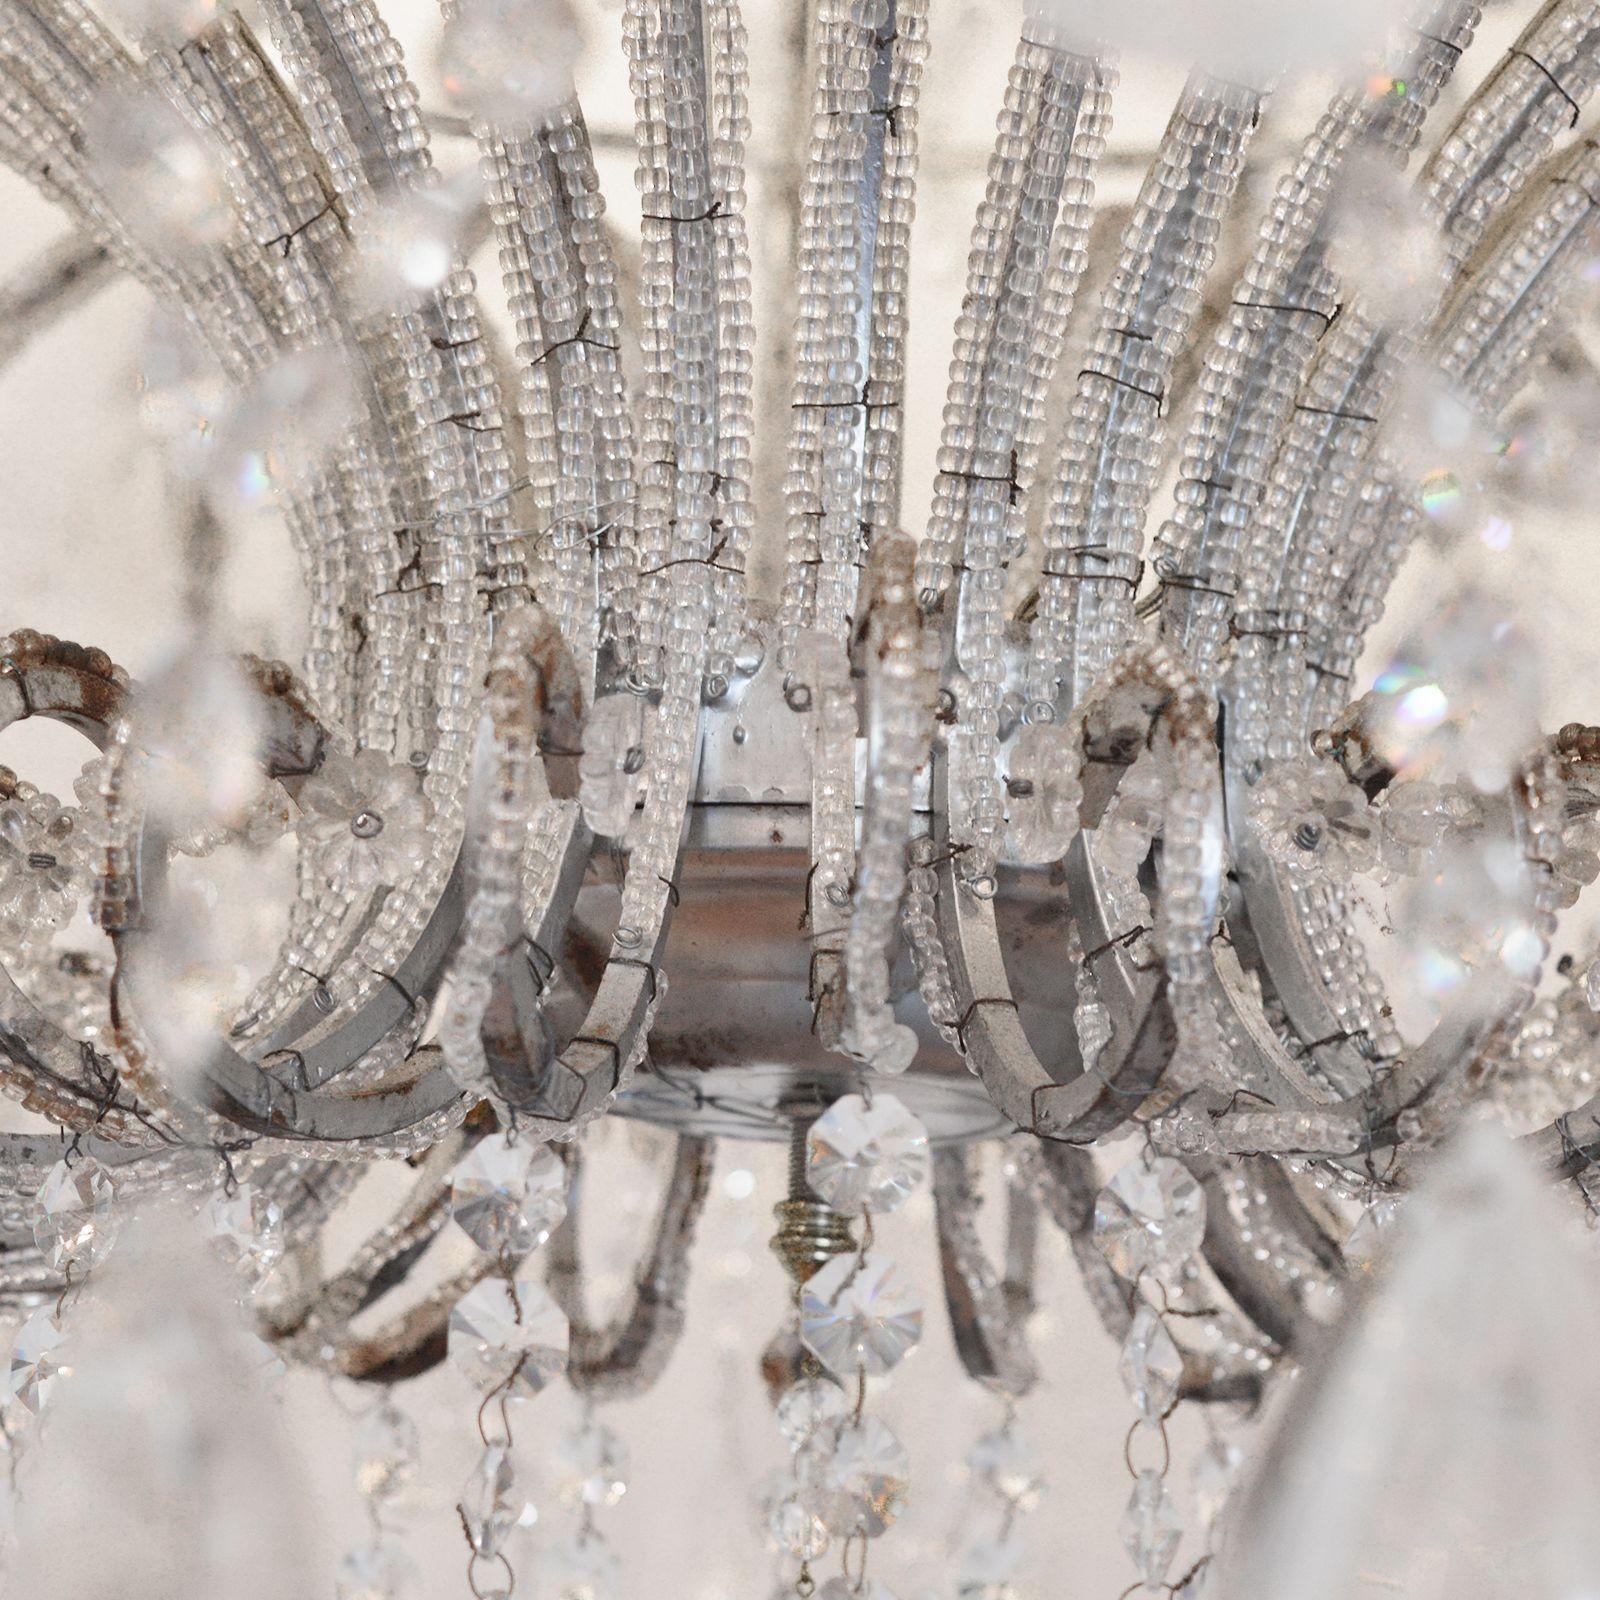 Glamorous Oversized Venetian Beading and Rock Crystal Chandelier. Italy, c. 1950 For Sale 1